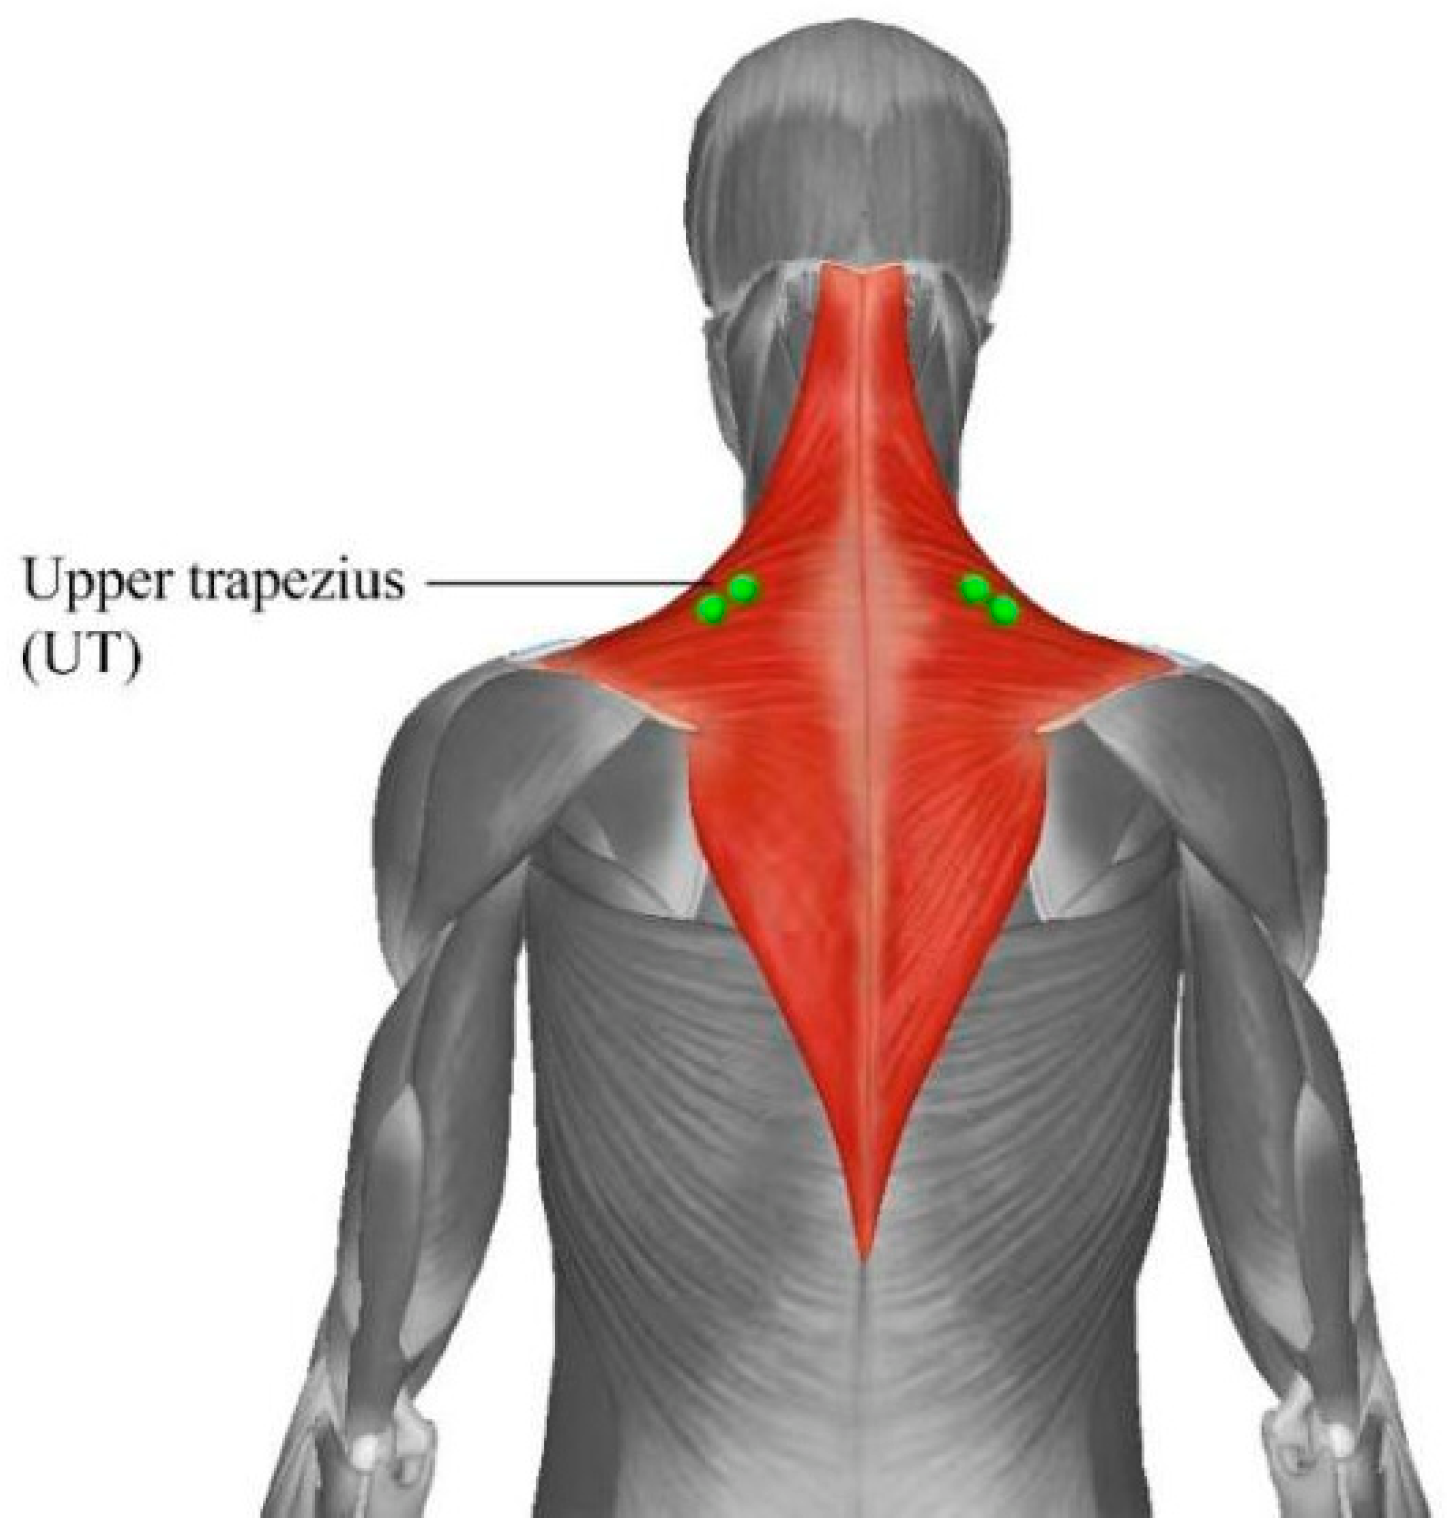 Stretching and Massage Does NOT Get Rid of Upper Trap Pain